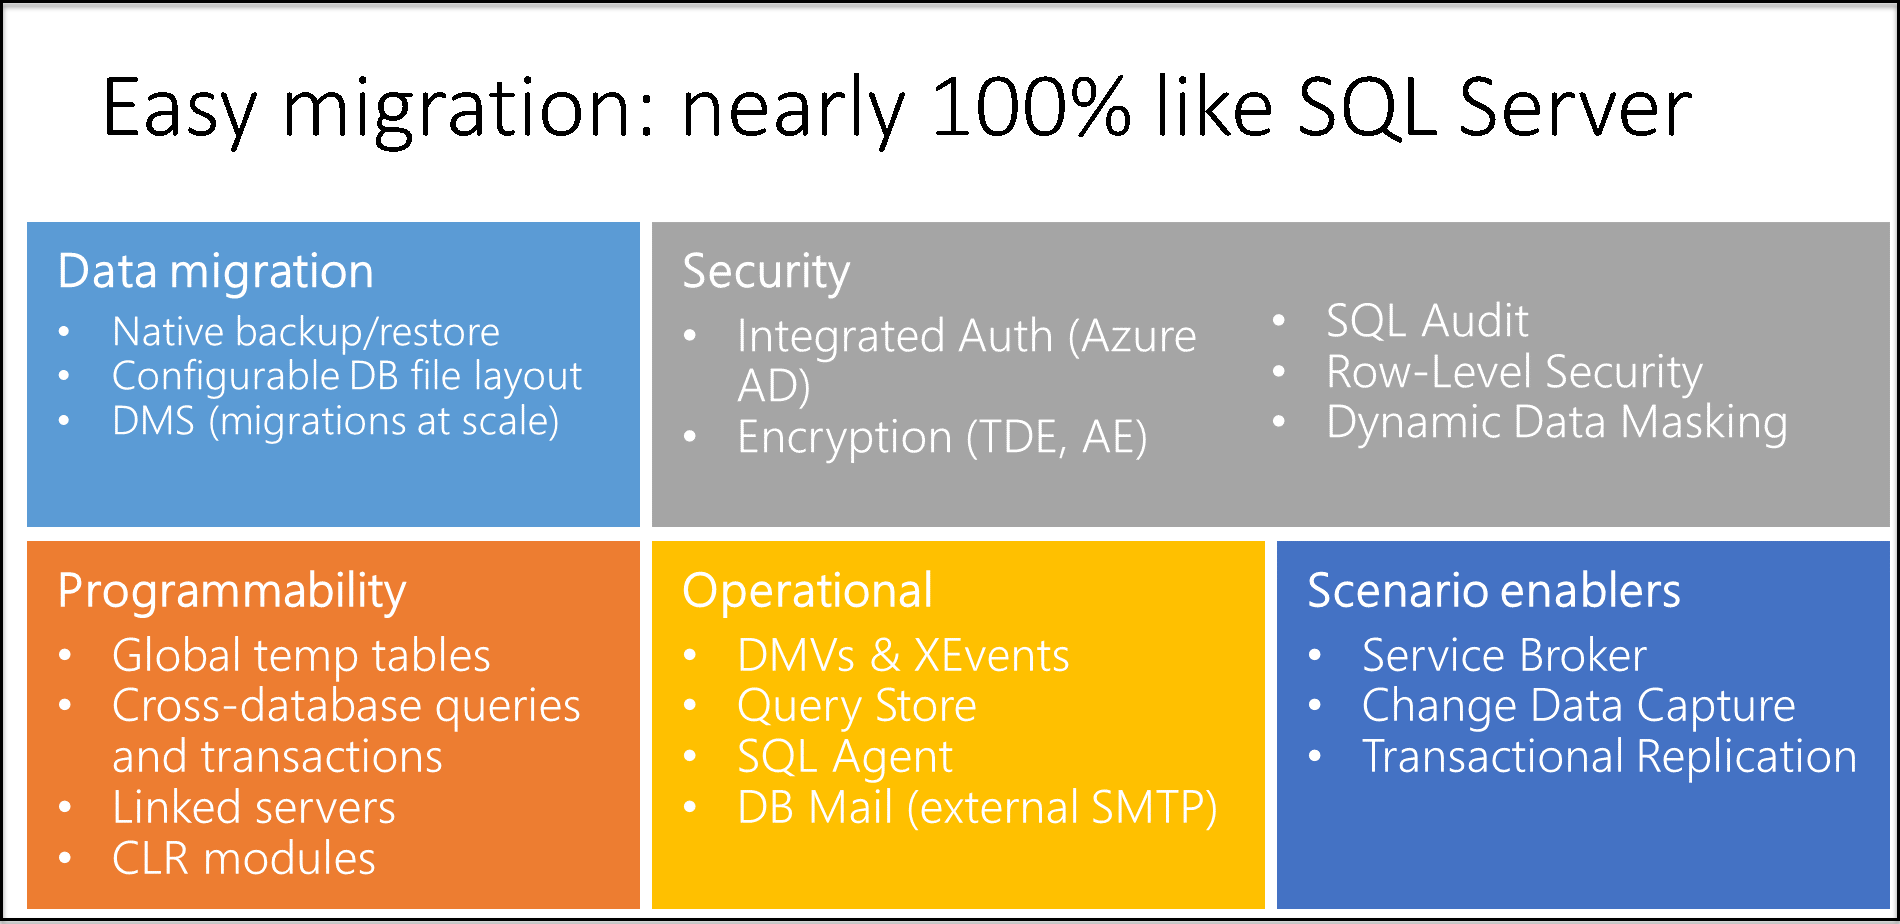 Diagram showing the easy migration from SQL Server.